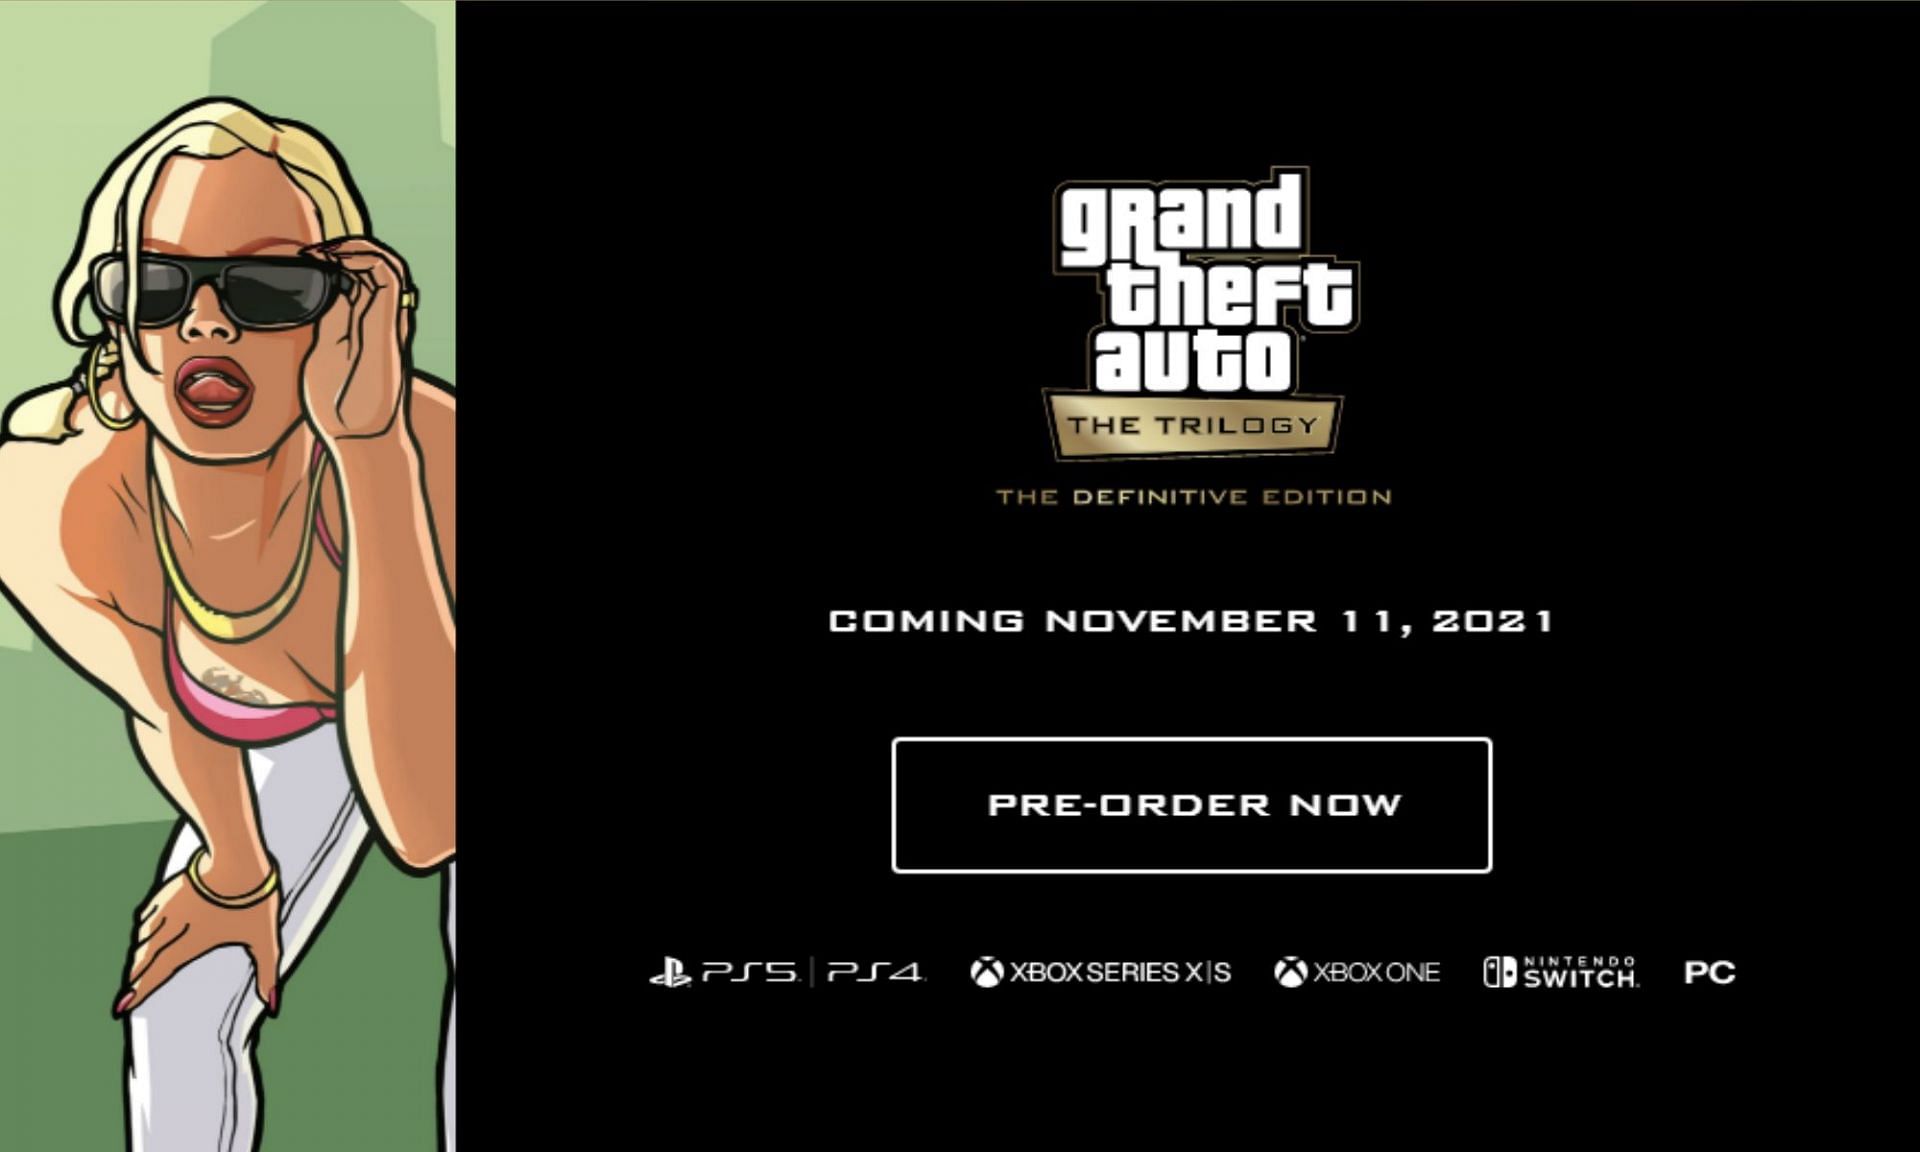 edition The theft Edition Auto: November Coming definitive auto iii – - The Theft grand Games, the Rockstar 11 Grand Trilogy Definitive